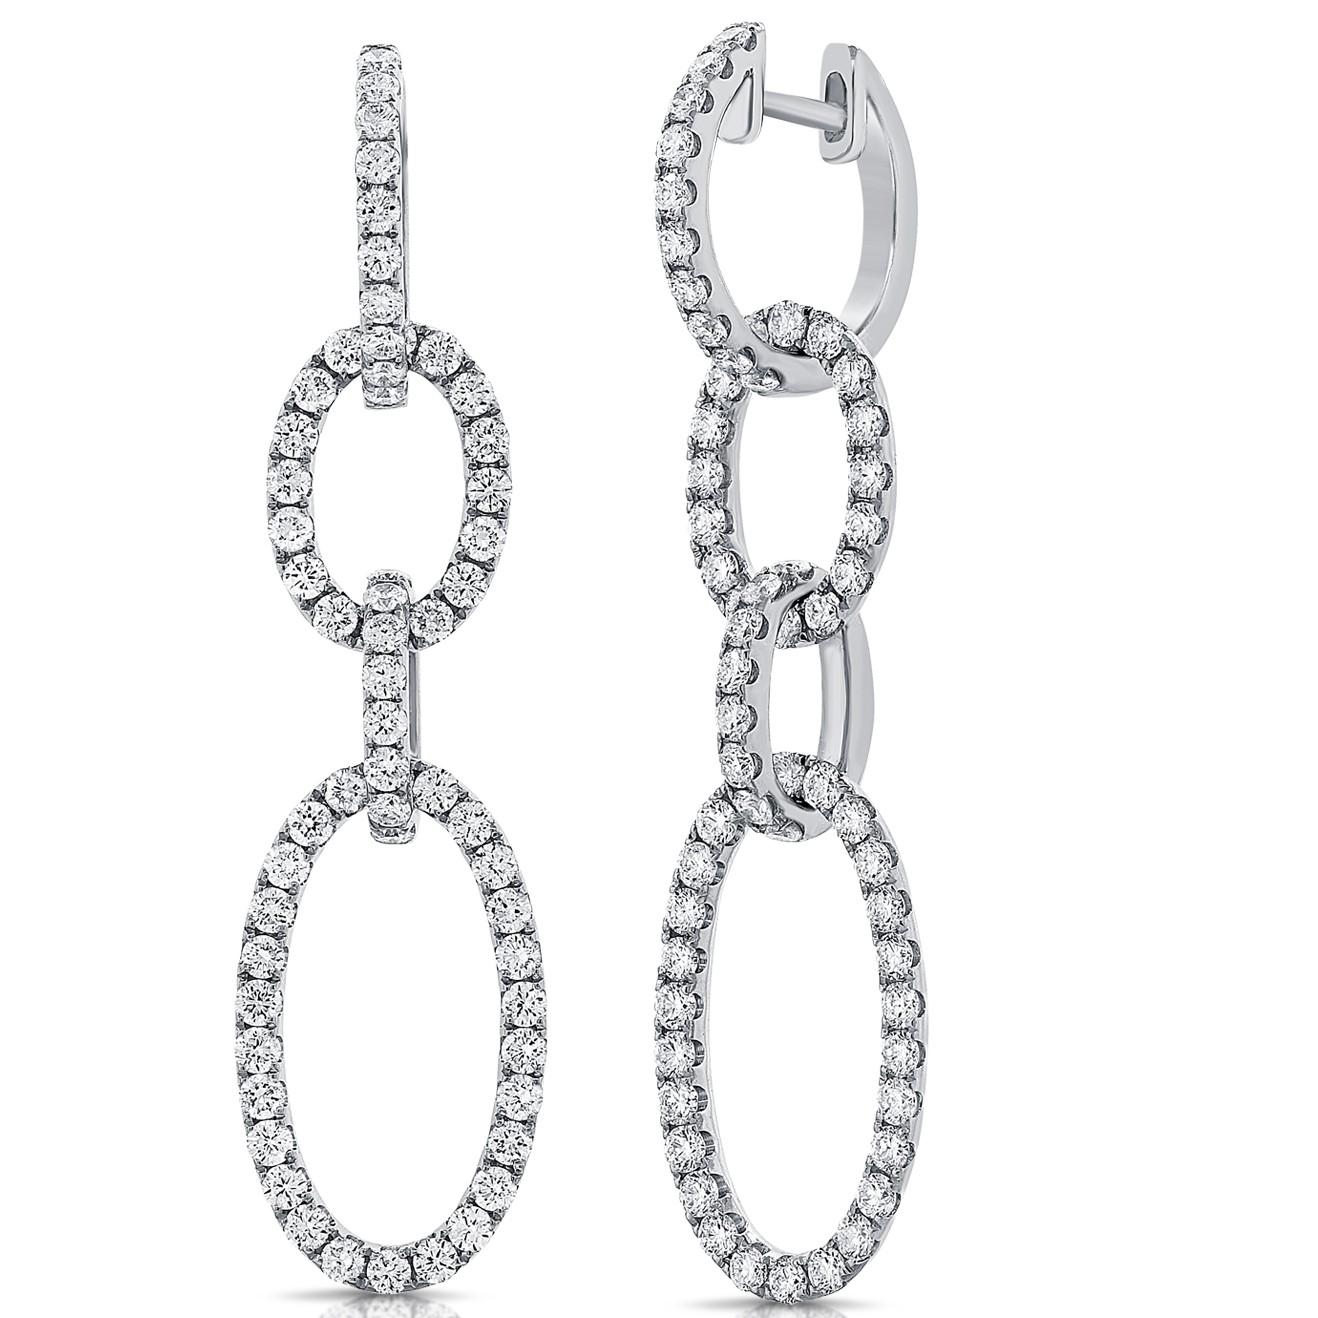 14K DIAMOND OVAL LINK DROP EARRINGS

   - Diamond Weight: 2.55 ct.
   - Gold Weight: 6.55 grams ( approx.)

This piece is perfect for everyday wear and makes the perfect Gift! 

We certify that this is an authentic piece of Fine jewelry. Every piece